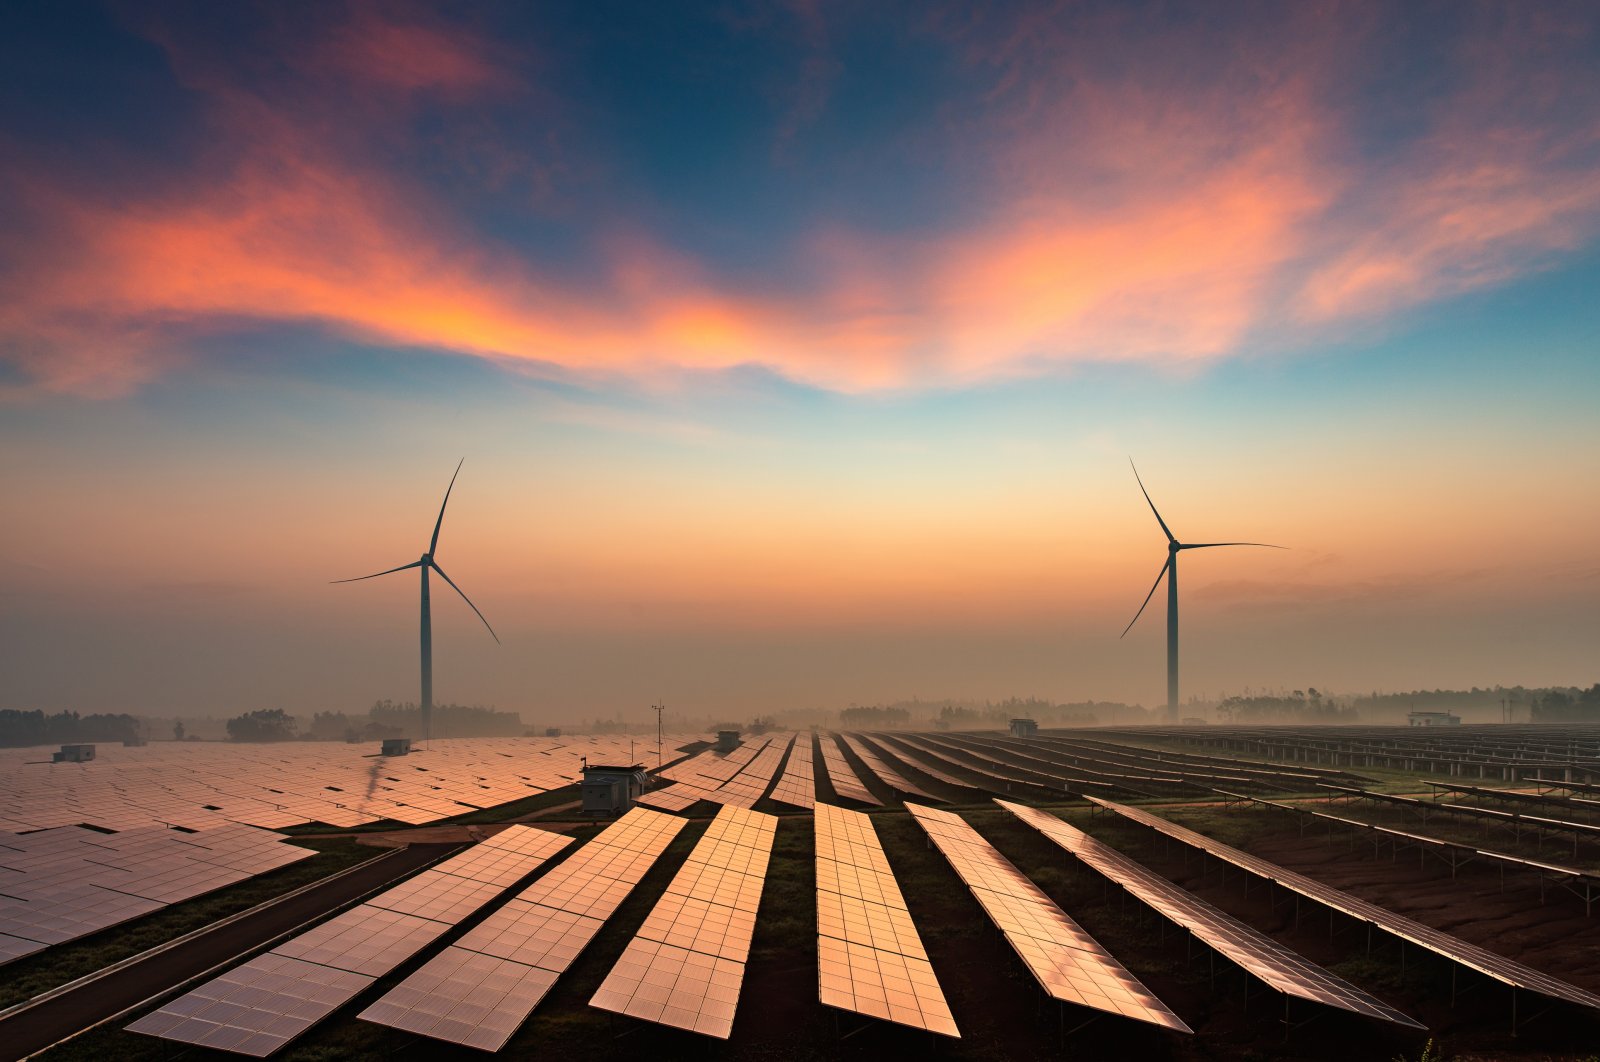 Currently, nearly half of Turkey’s electricity supply is sourced from renewables. In the generation mix, wind and solar energy are growing to gain a share of around 15% in total demand. (Photo by iStock)